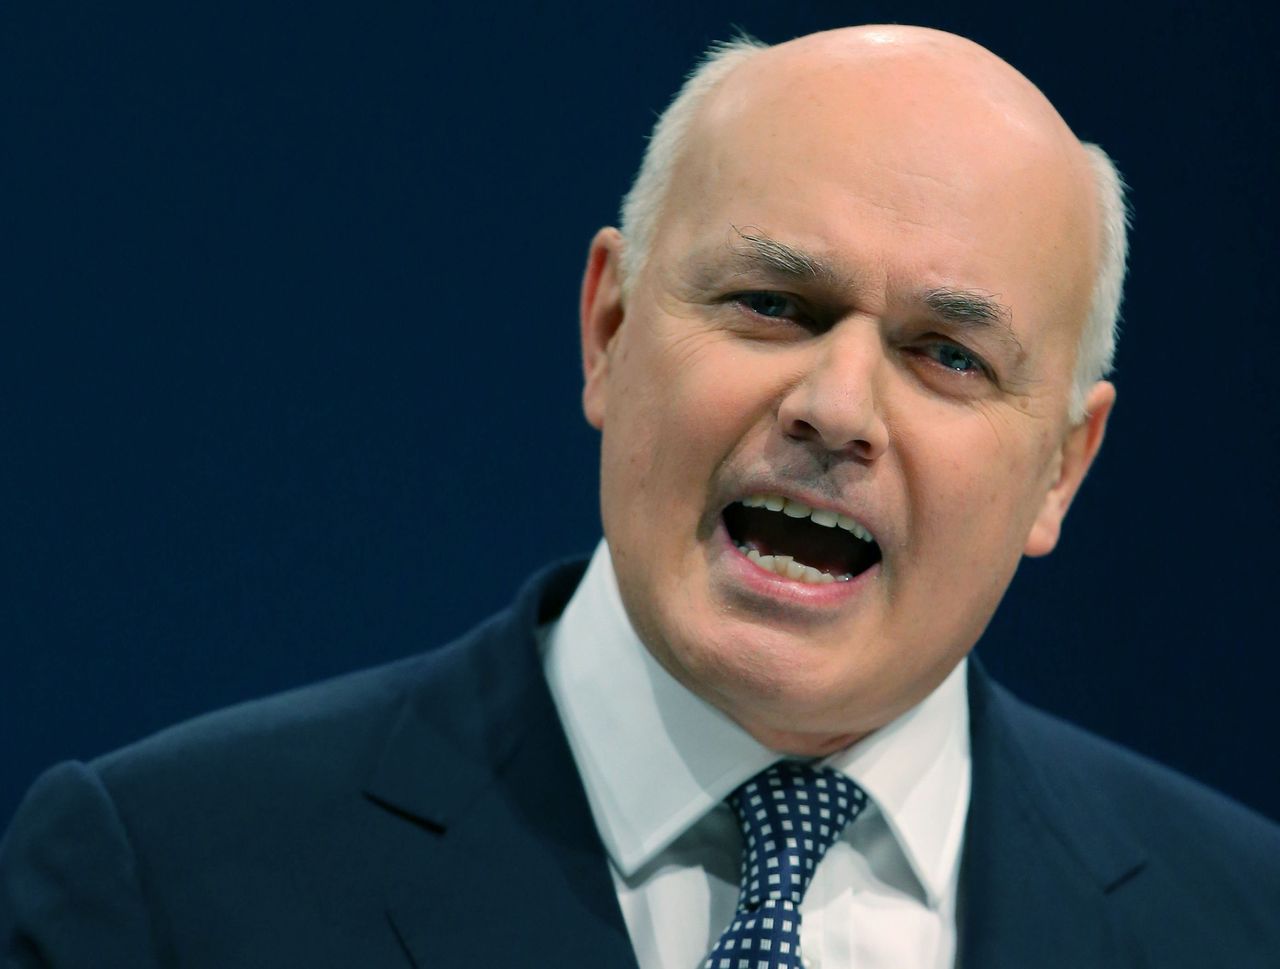 Iain Duncan Smith wants to ditch carbon taxes post Brexit